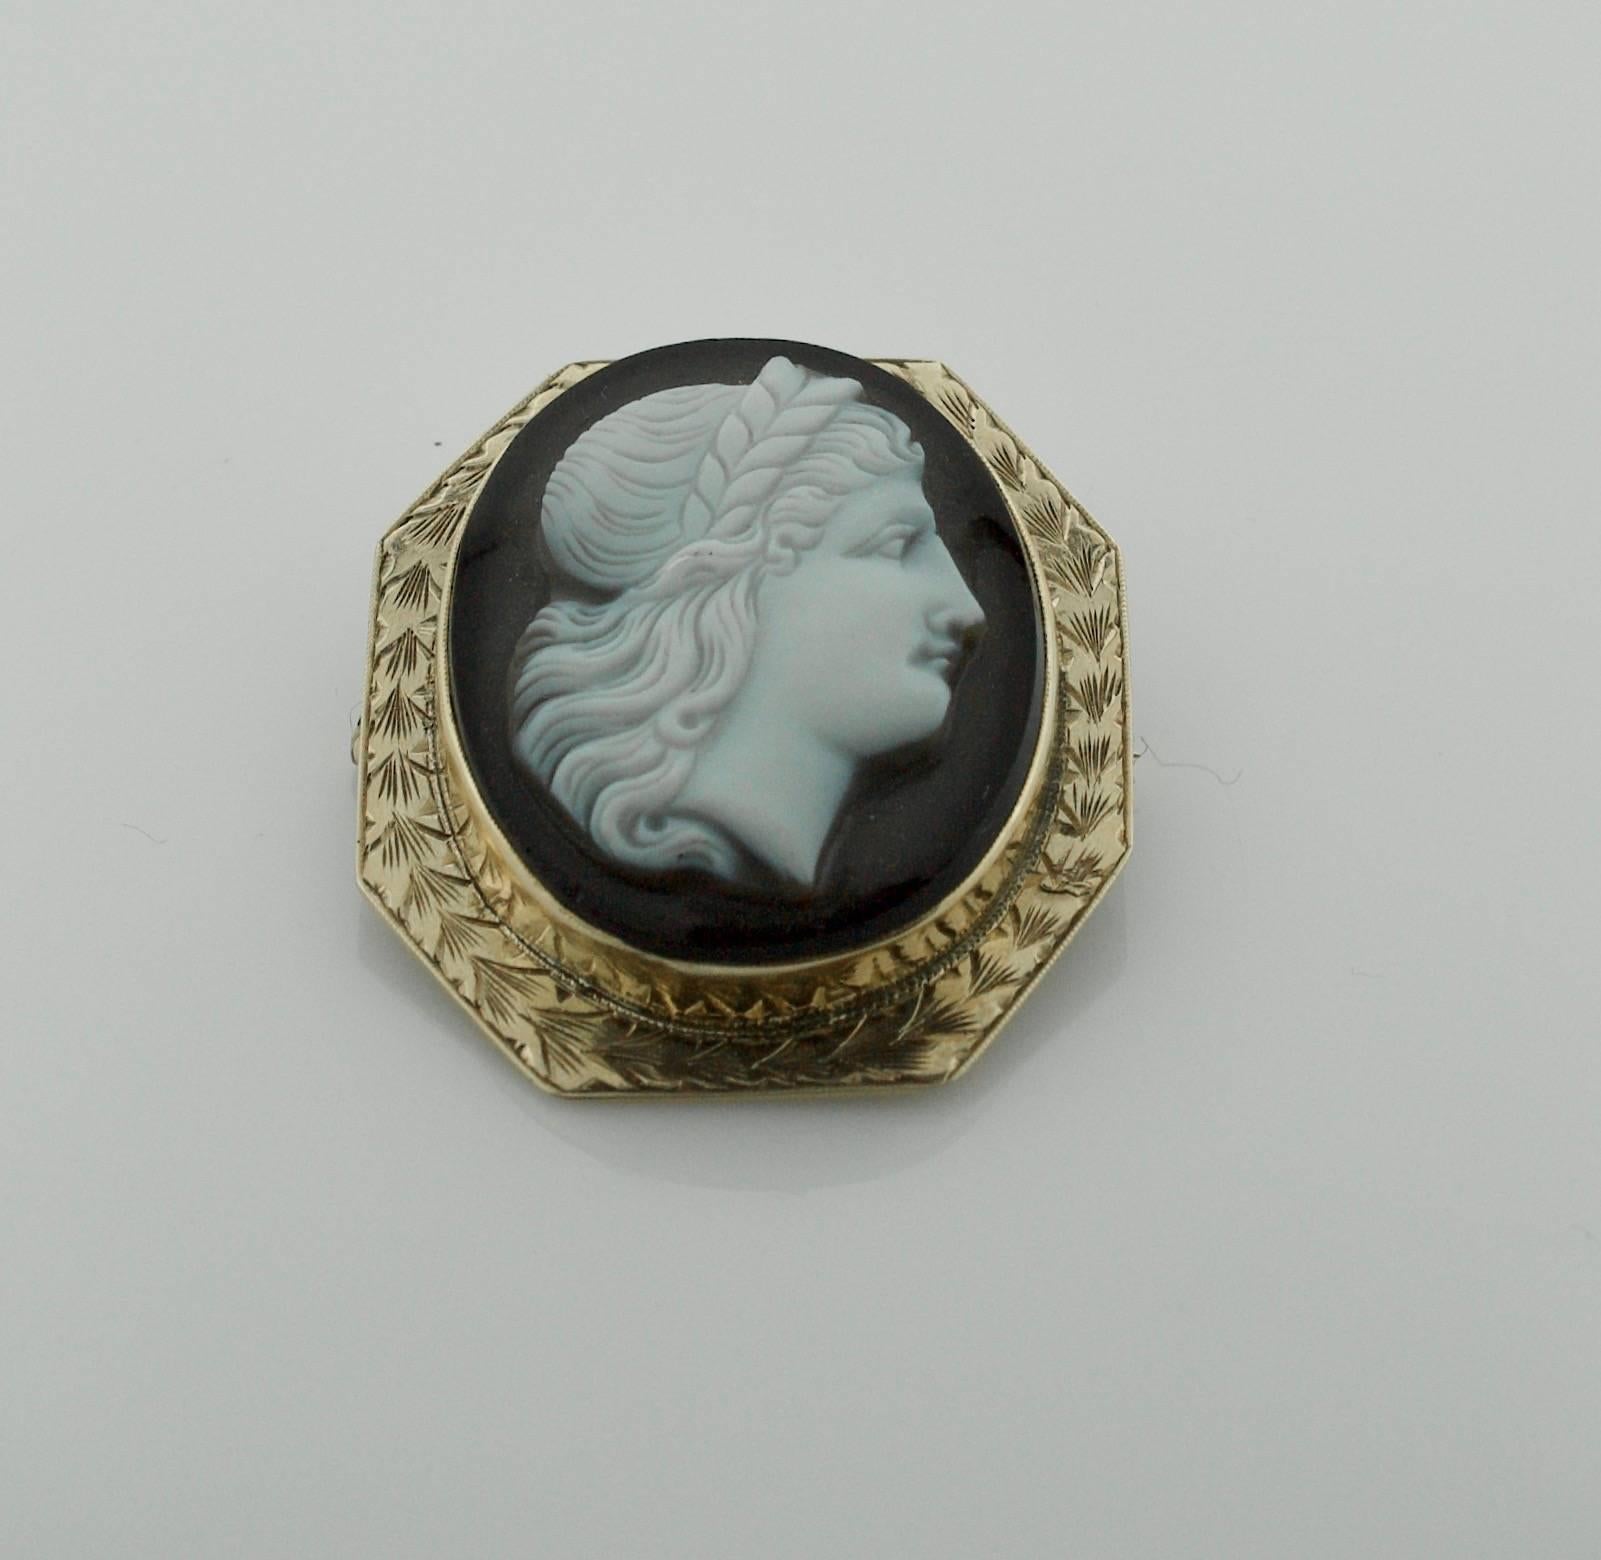 Circa 1915 Stone Cameo Brooch/Pendant in Yellow Gold
Depicting a Beauty of 1915